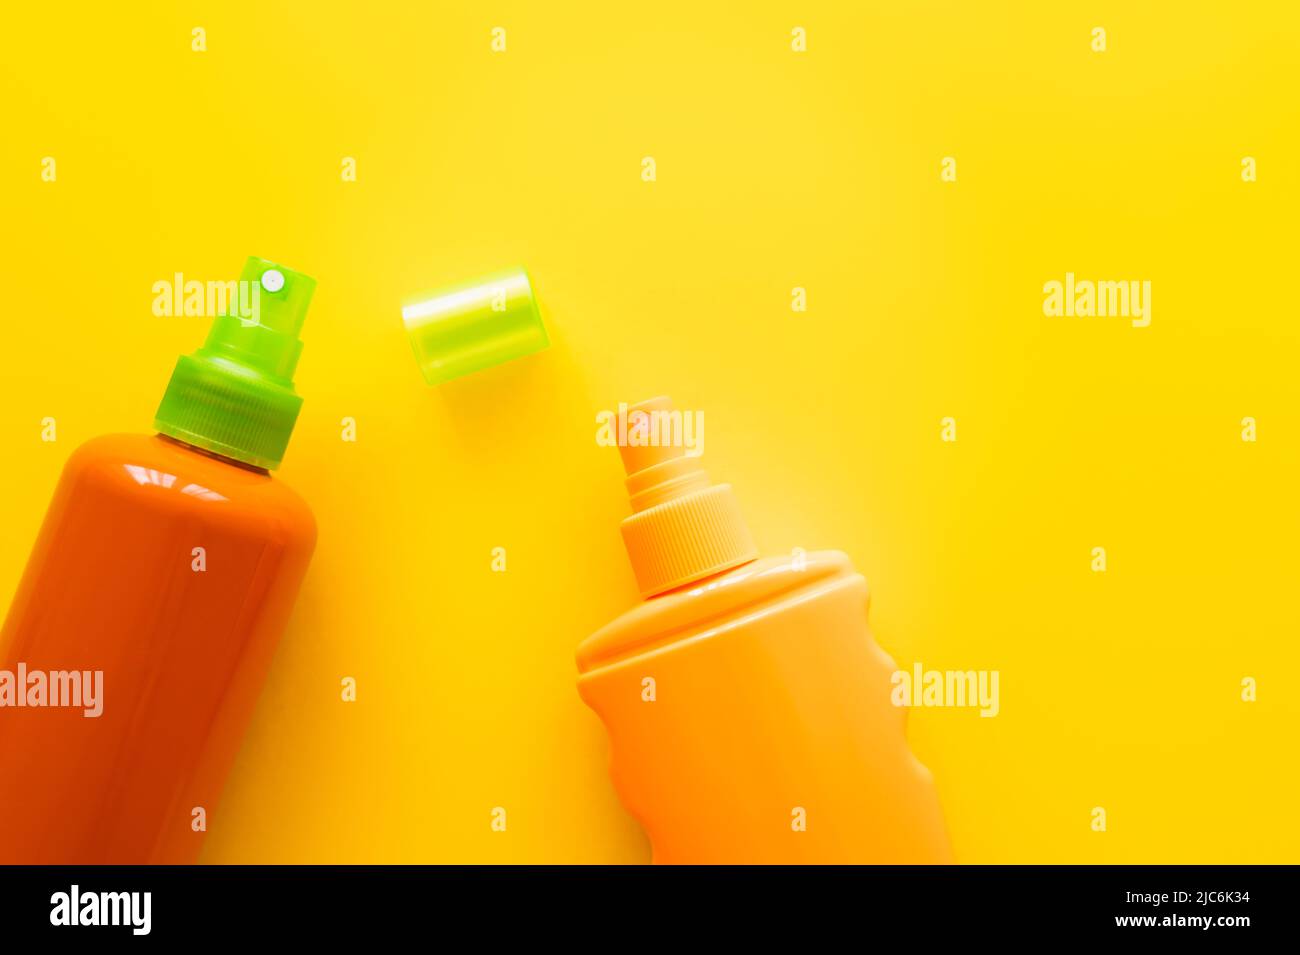 Top view of bottles of sunscreens on yellow surface Stock Photo